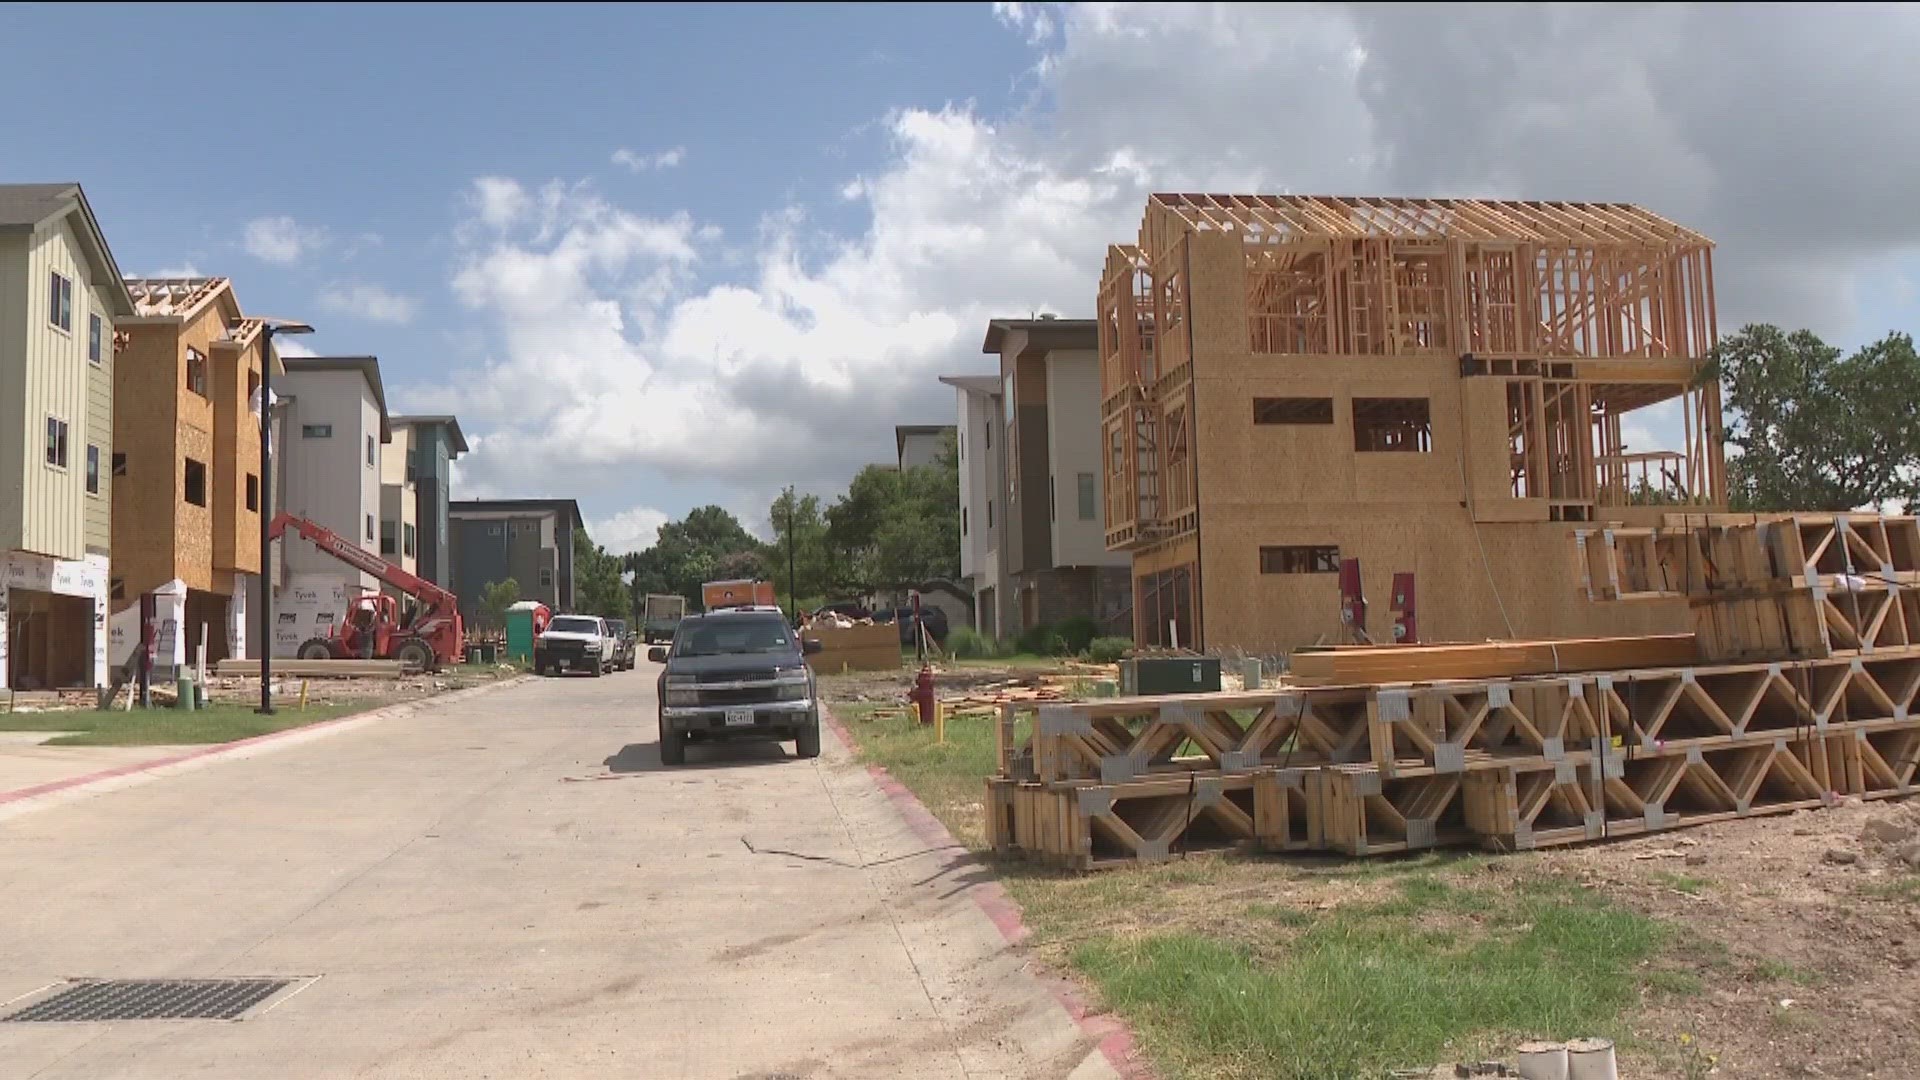 Housing permits are on the rise in Austin. In fact, a new study says that in 2022, Austin approved the most permits per capita for new houses and apartments.